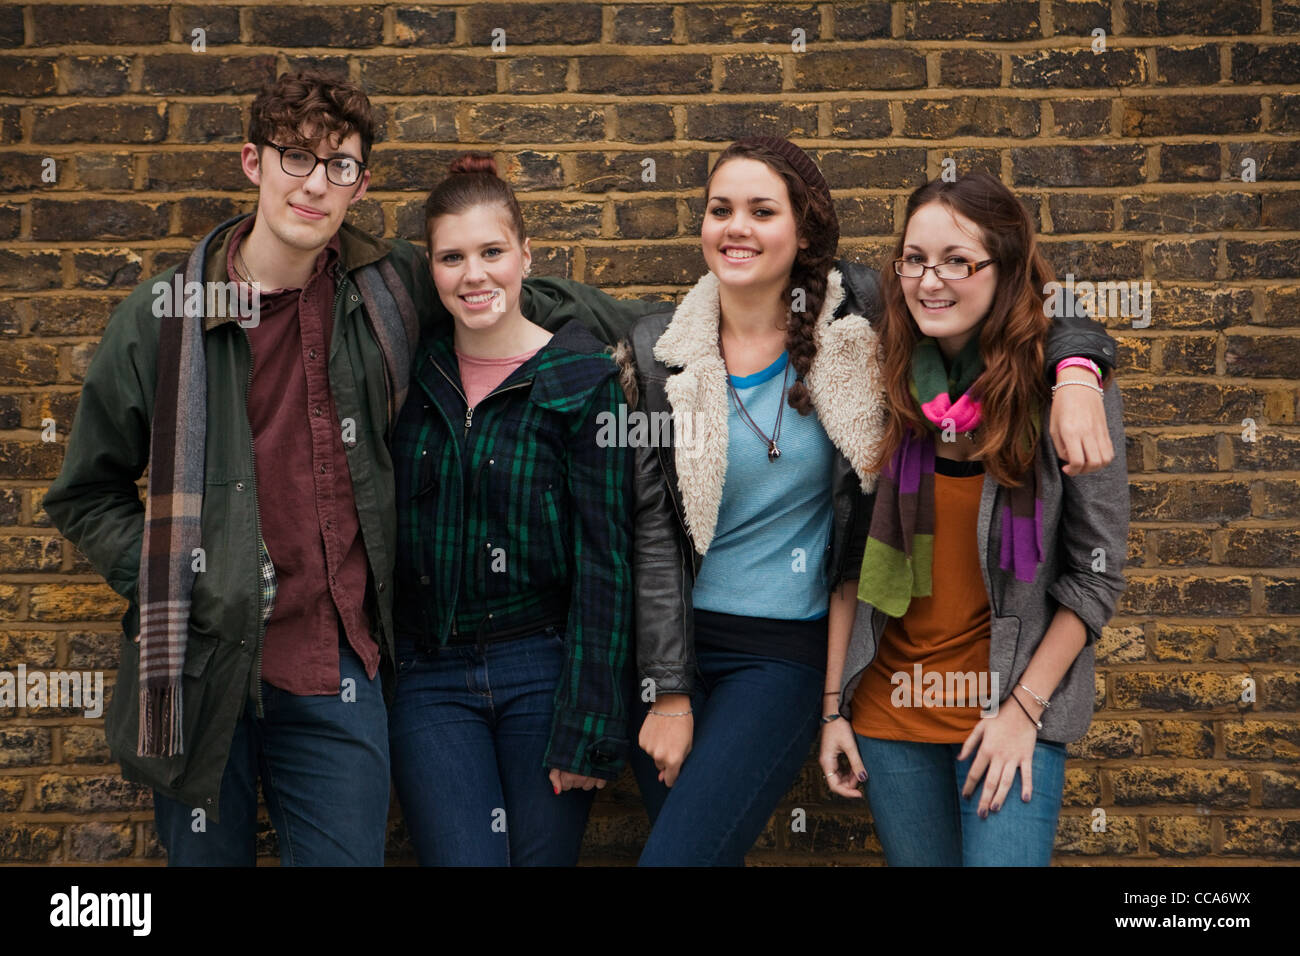 Four young friends against brick wall, smiling Stock Photo